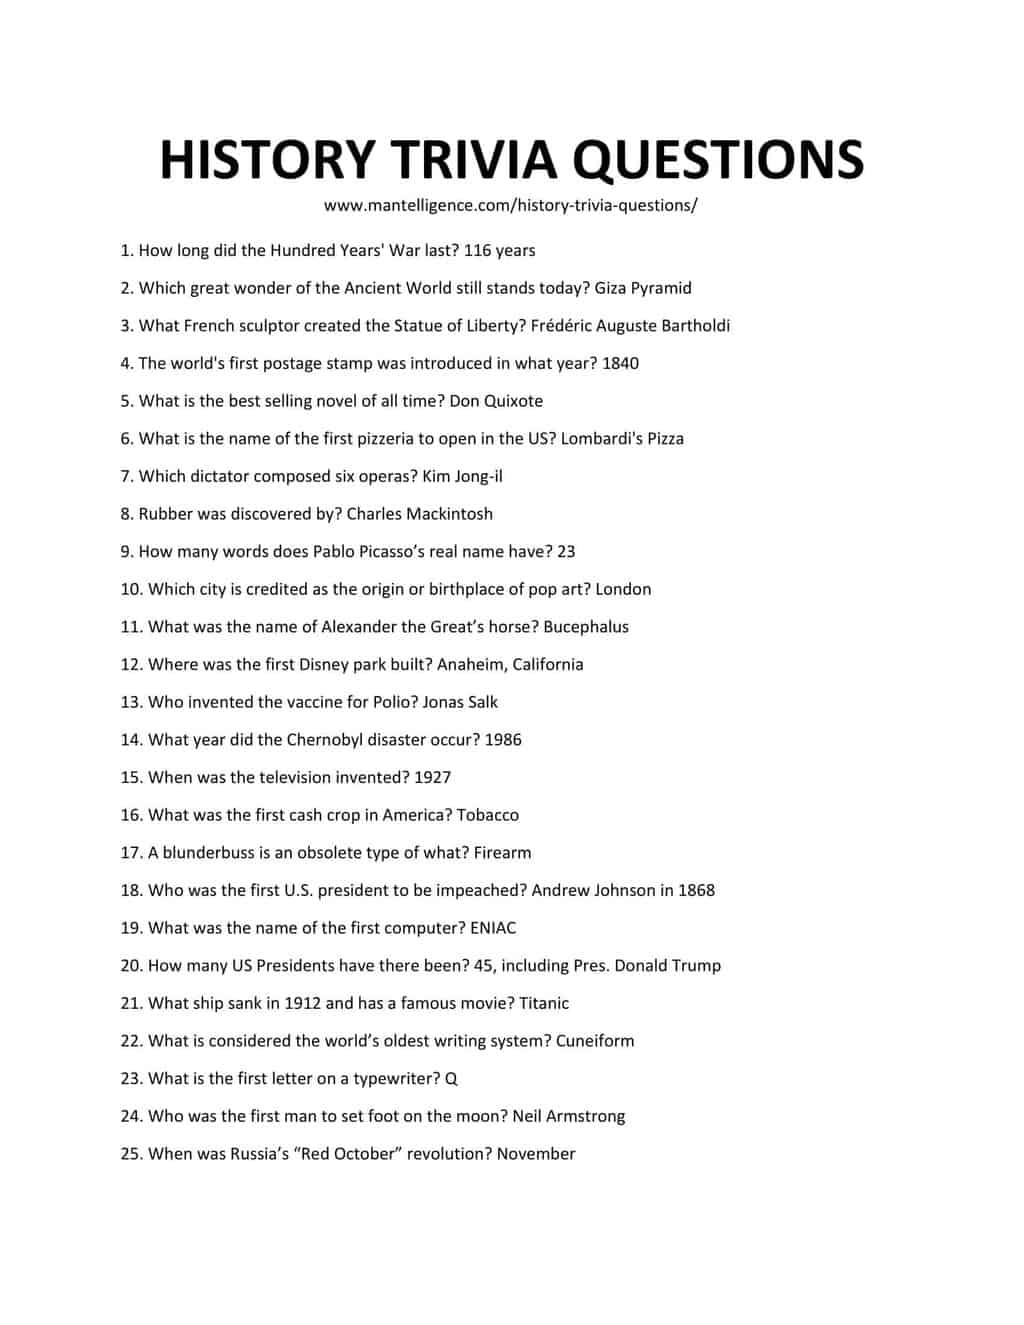 100 History Trivia Question With Answers